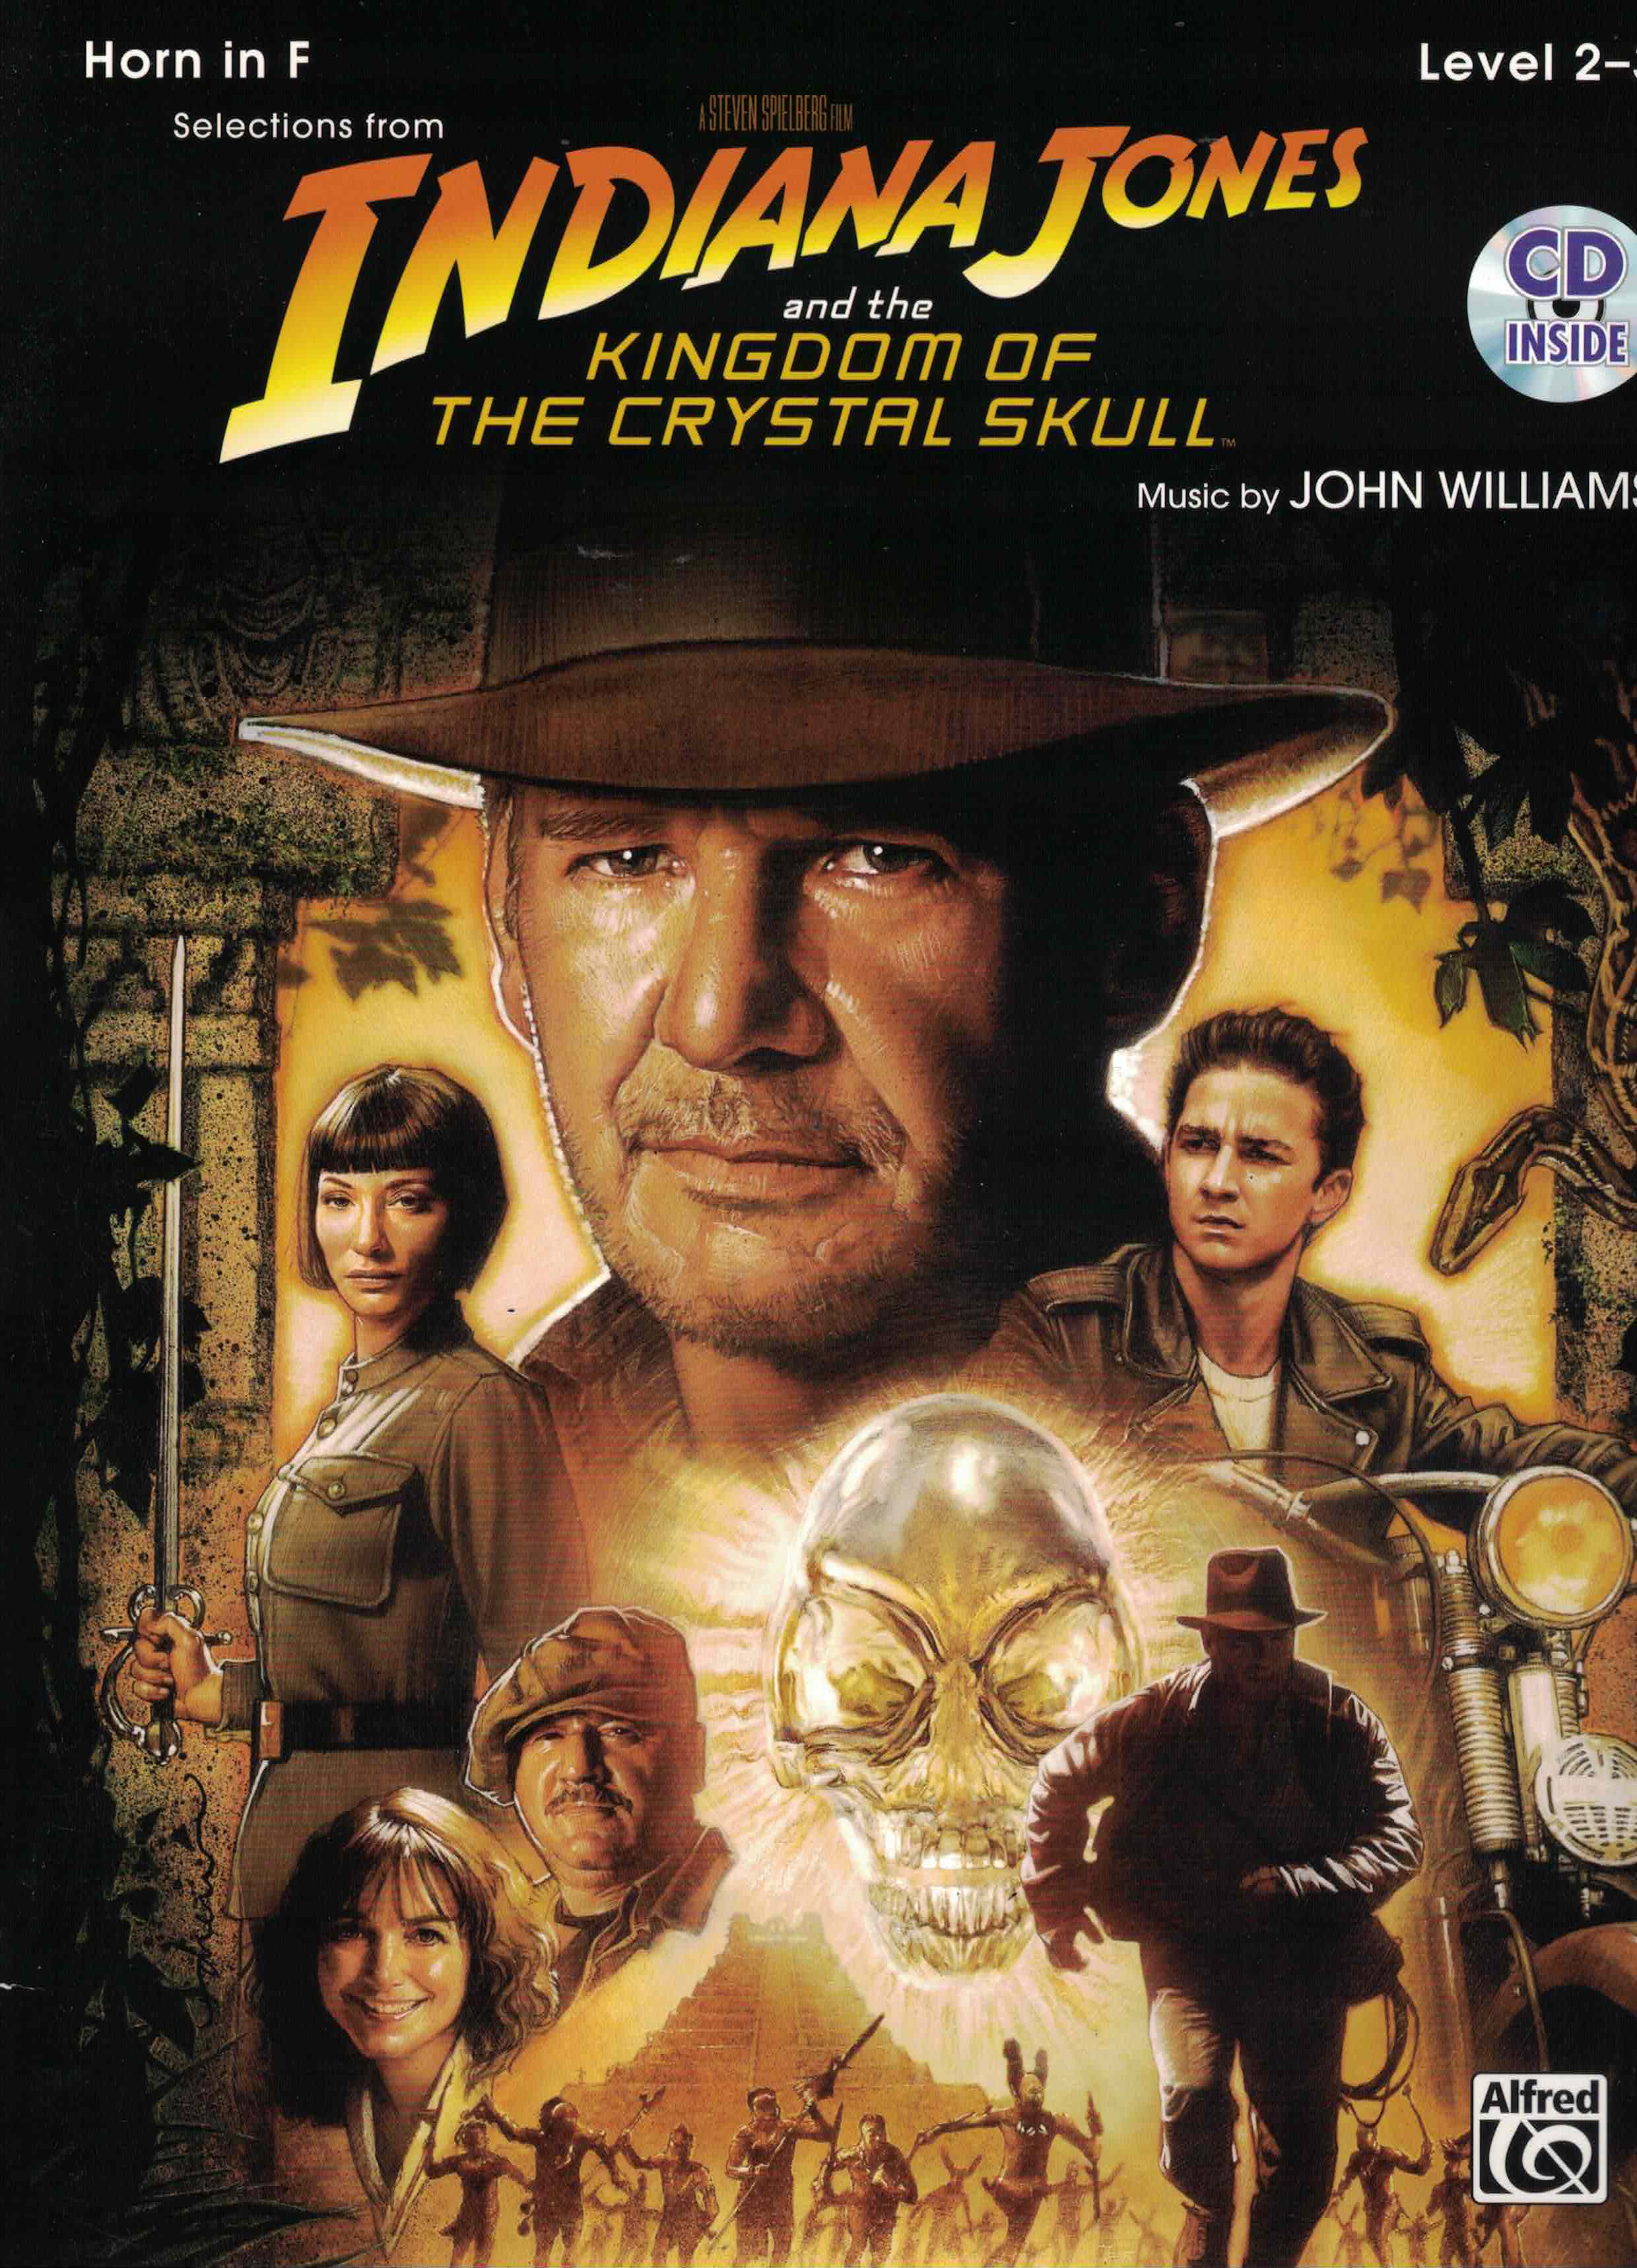 Selections from Indiana Jones, Hrn CD